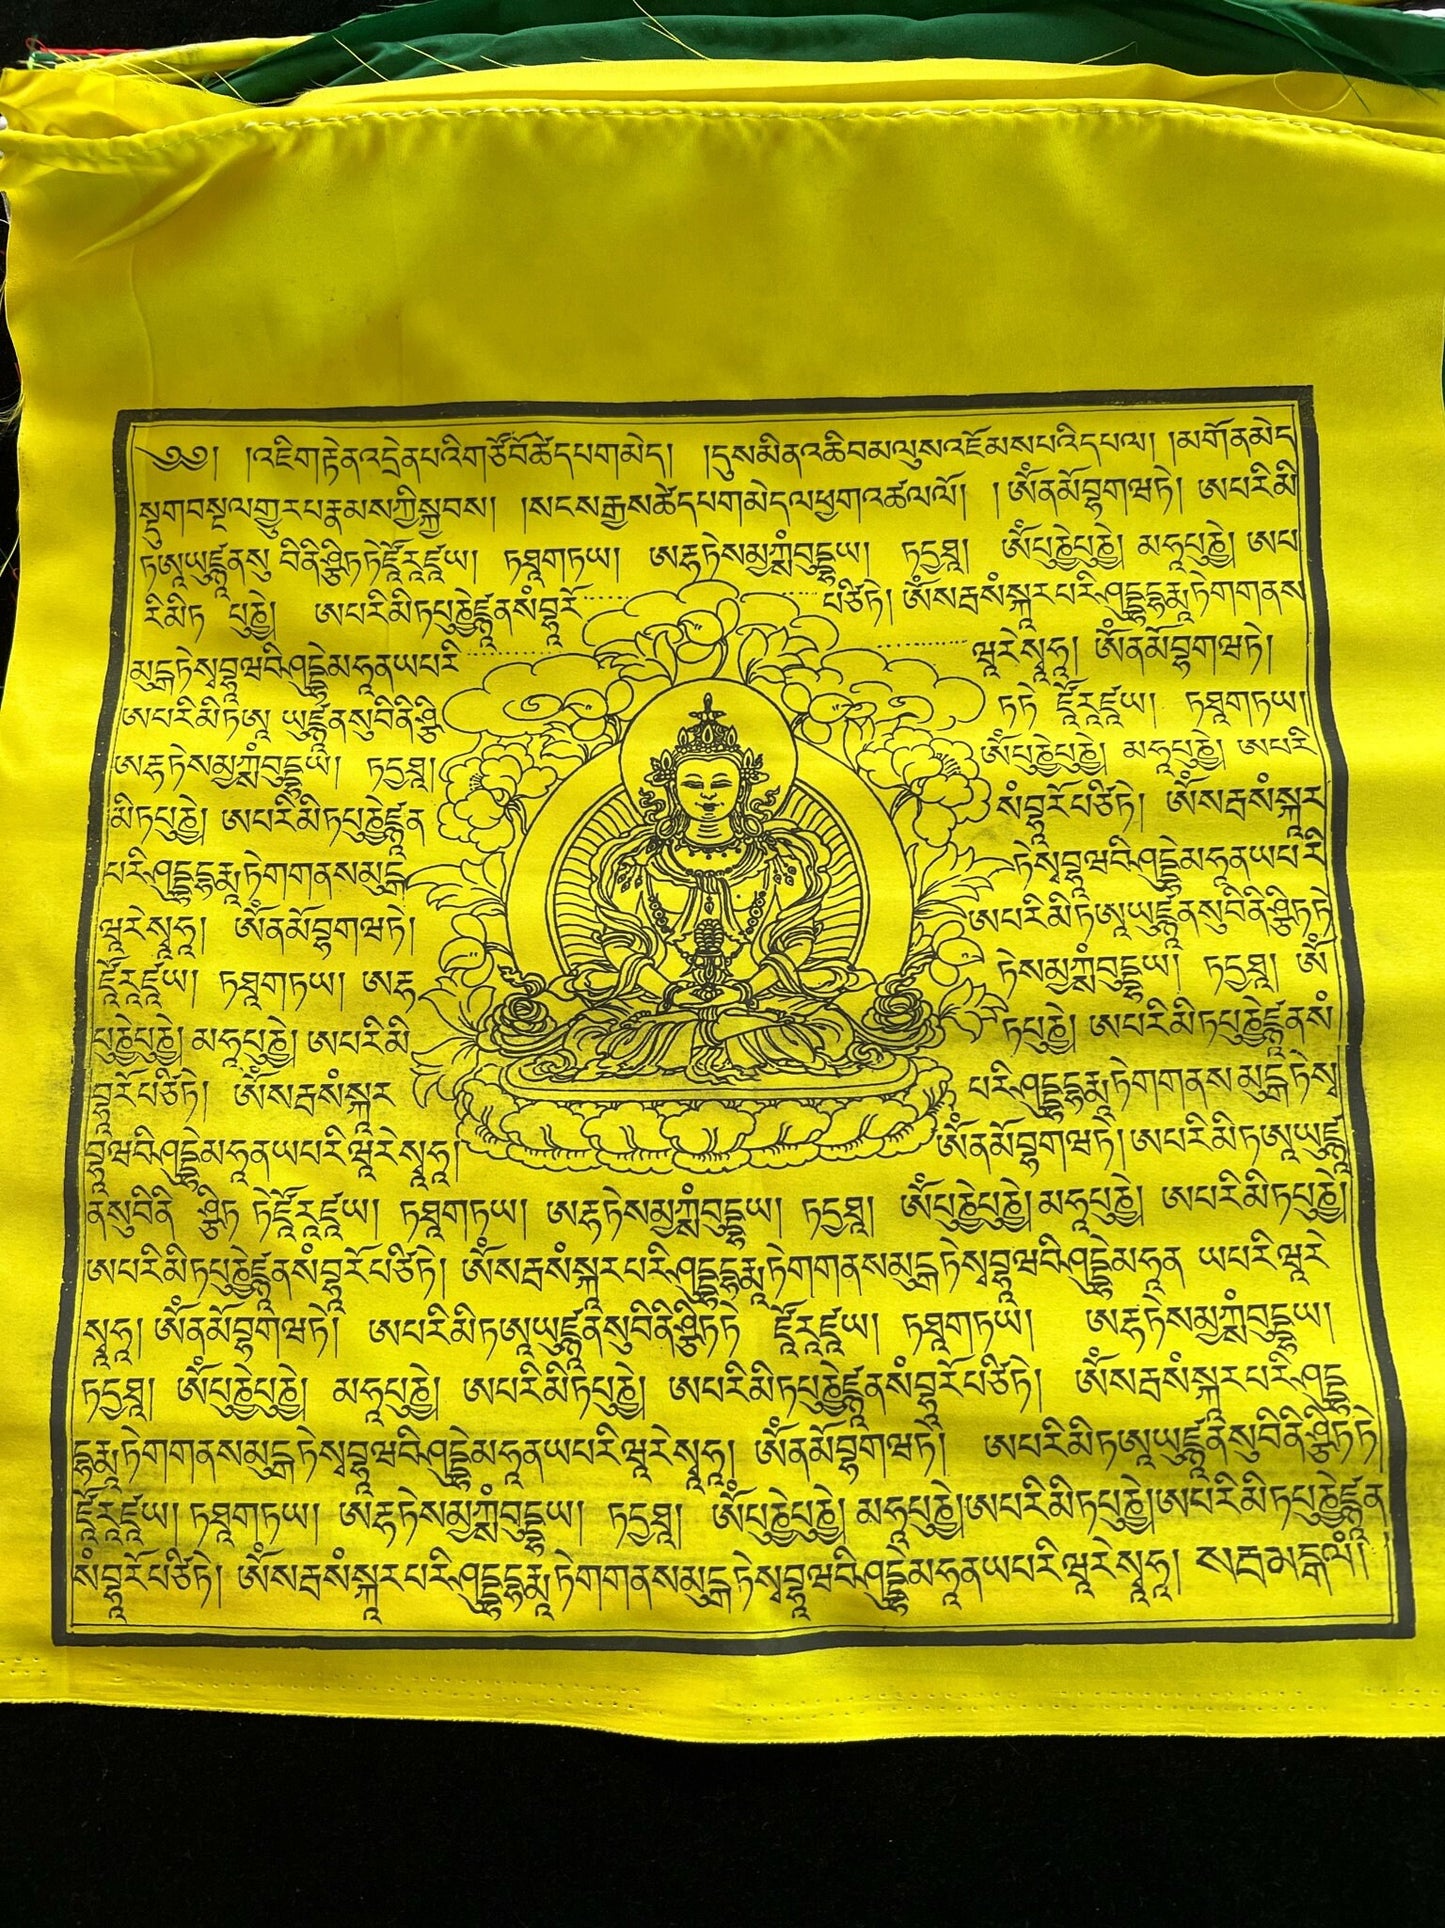 Close-up of yellow Amitayus flag with central deity image and Tibetan prayers, from set of 25 flags, promoting stability and longevity